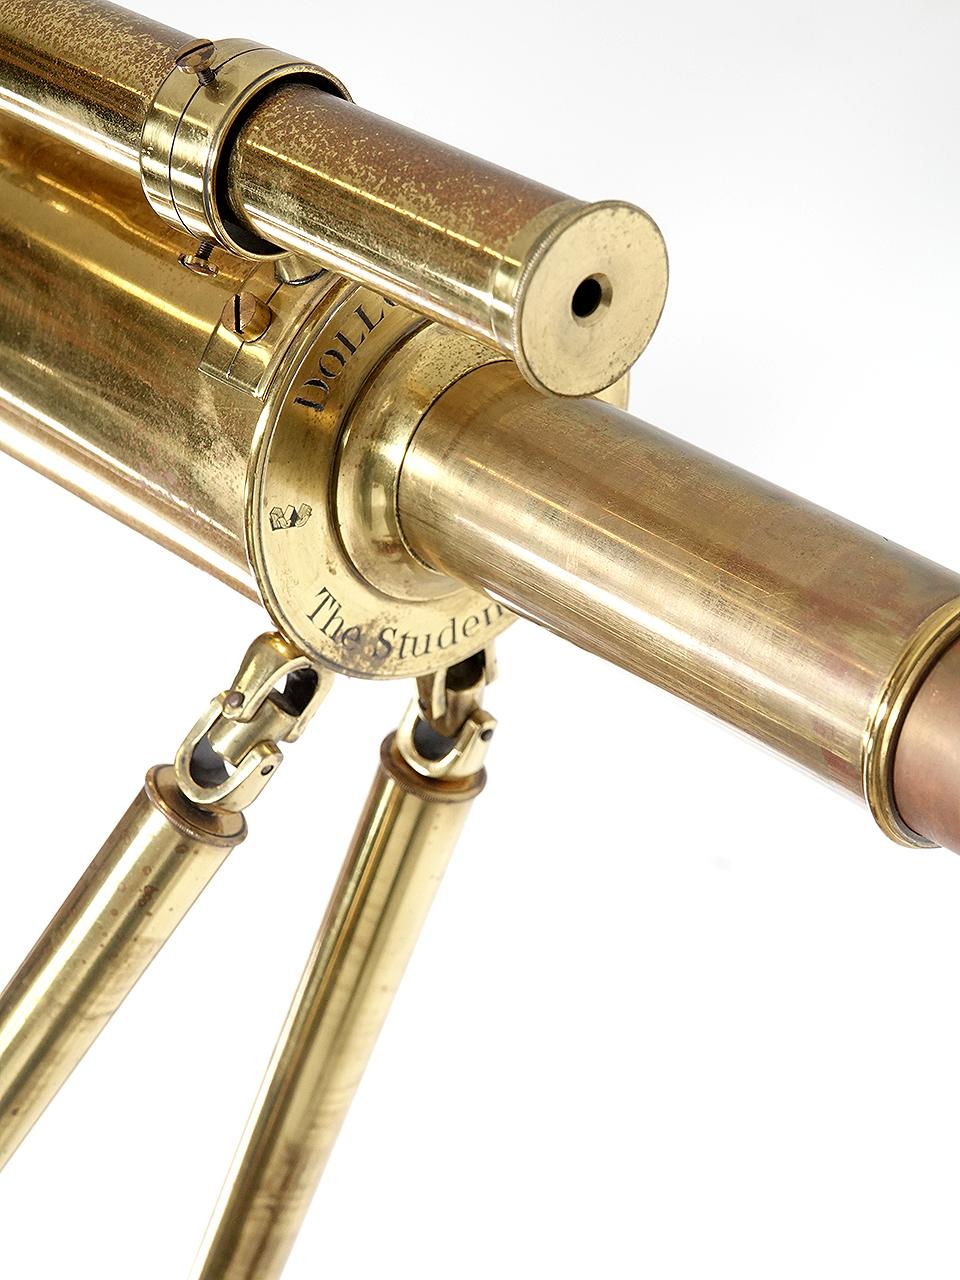 This is a beautiful telescope in the original case including the tripod. The tube measures about 3.5 inches and extends to 50 inches. It looks as if this example is mid 19th century but could be later. The instrument is signed as is the box... but